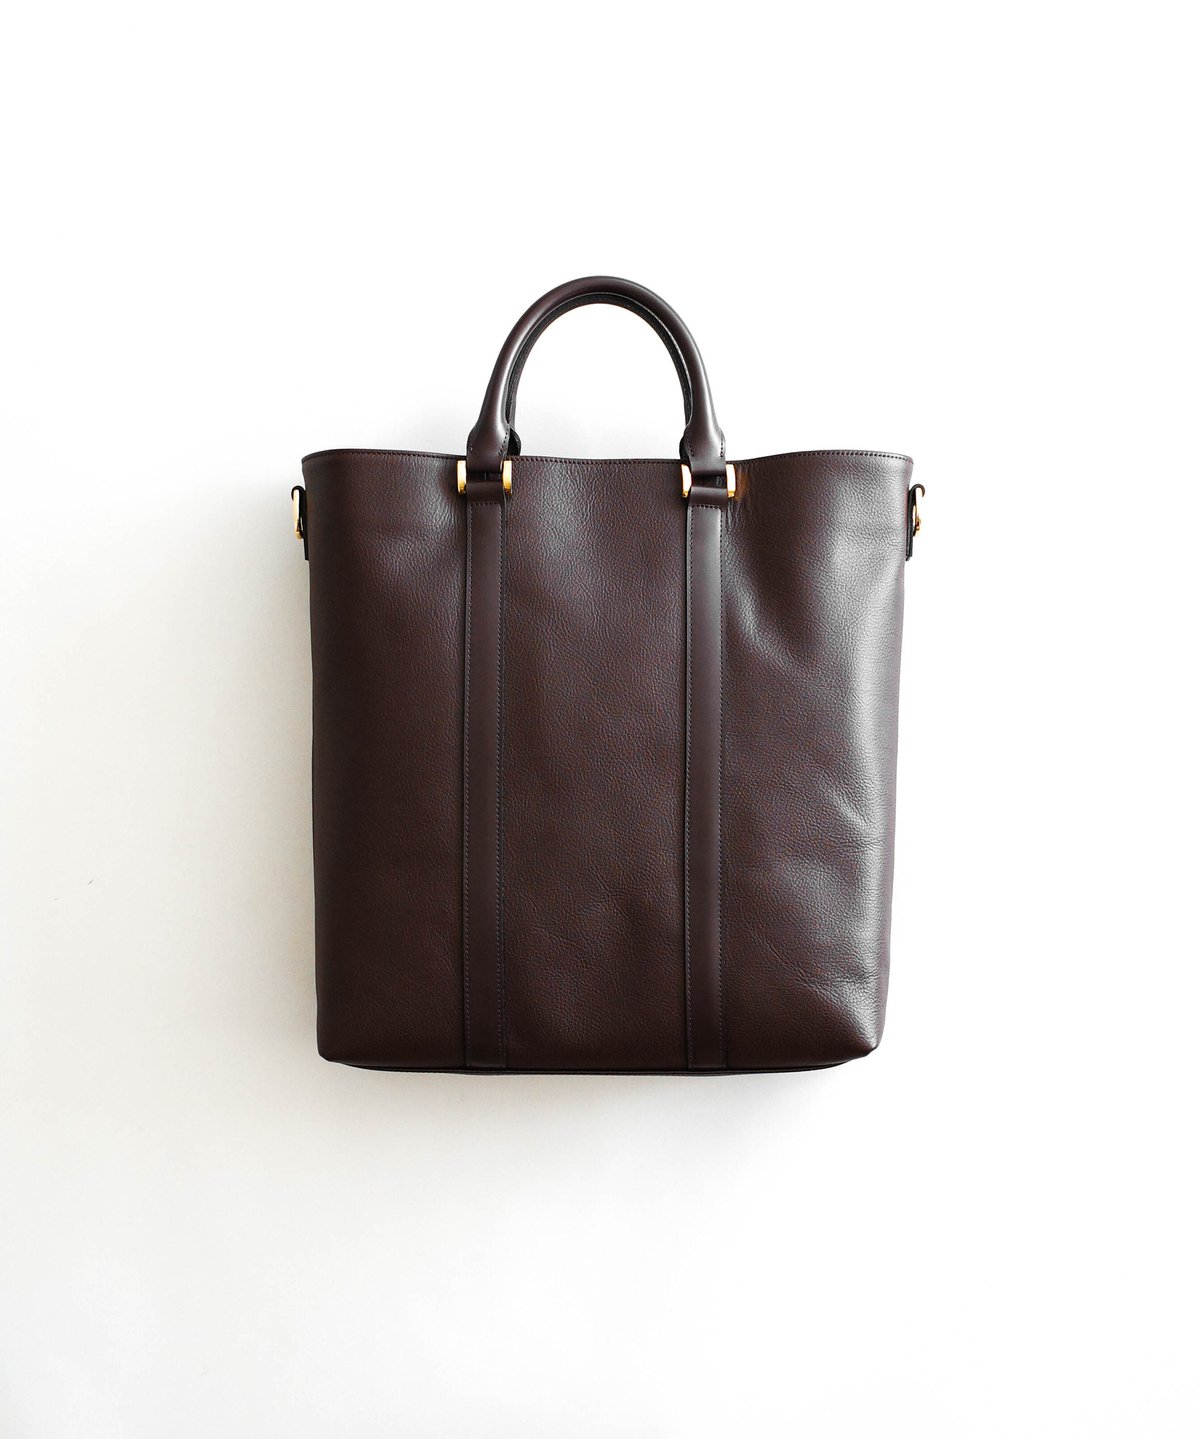 LEATHER TOTE BAG | CTHY